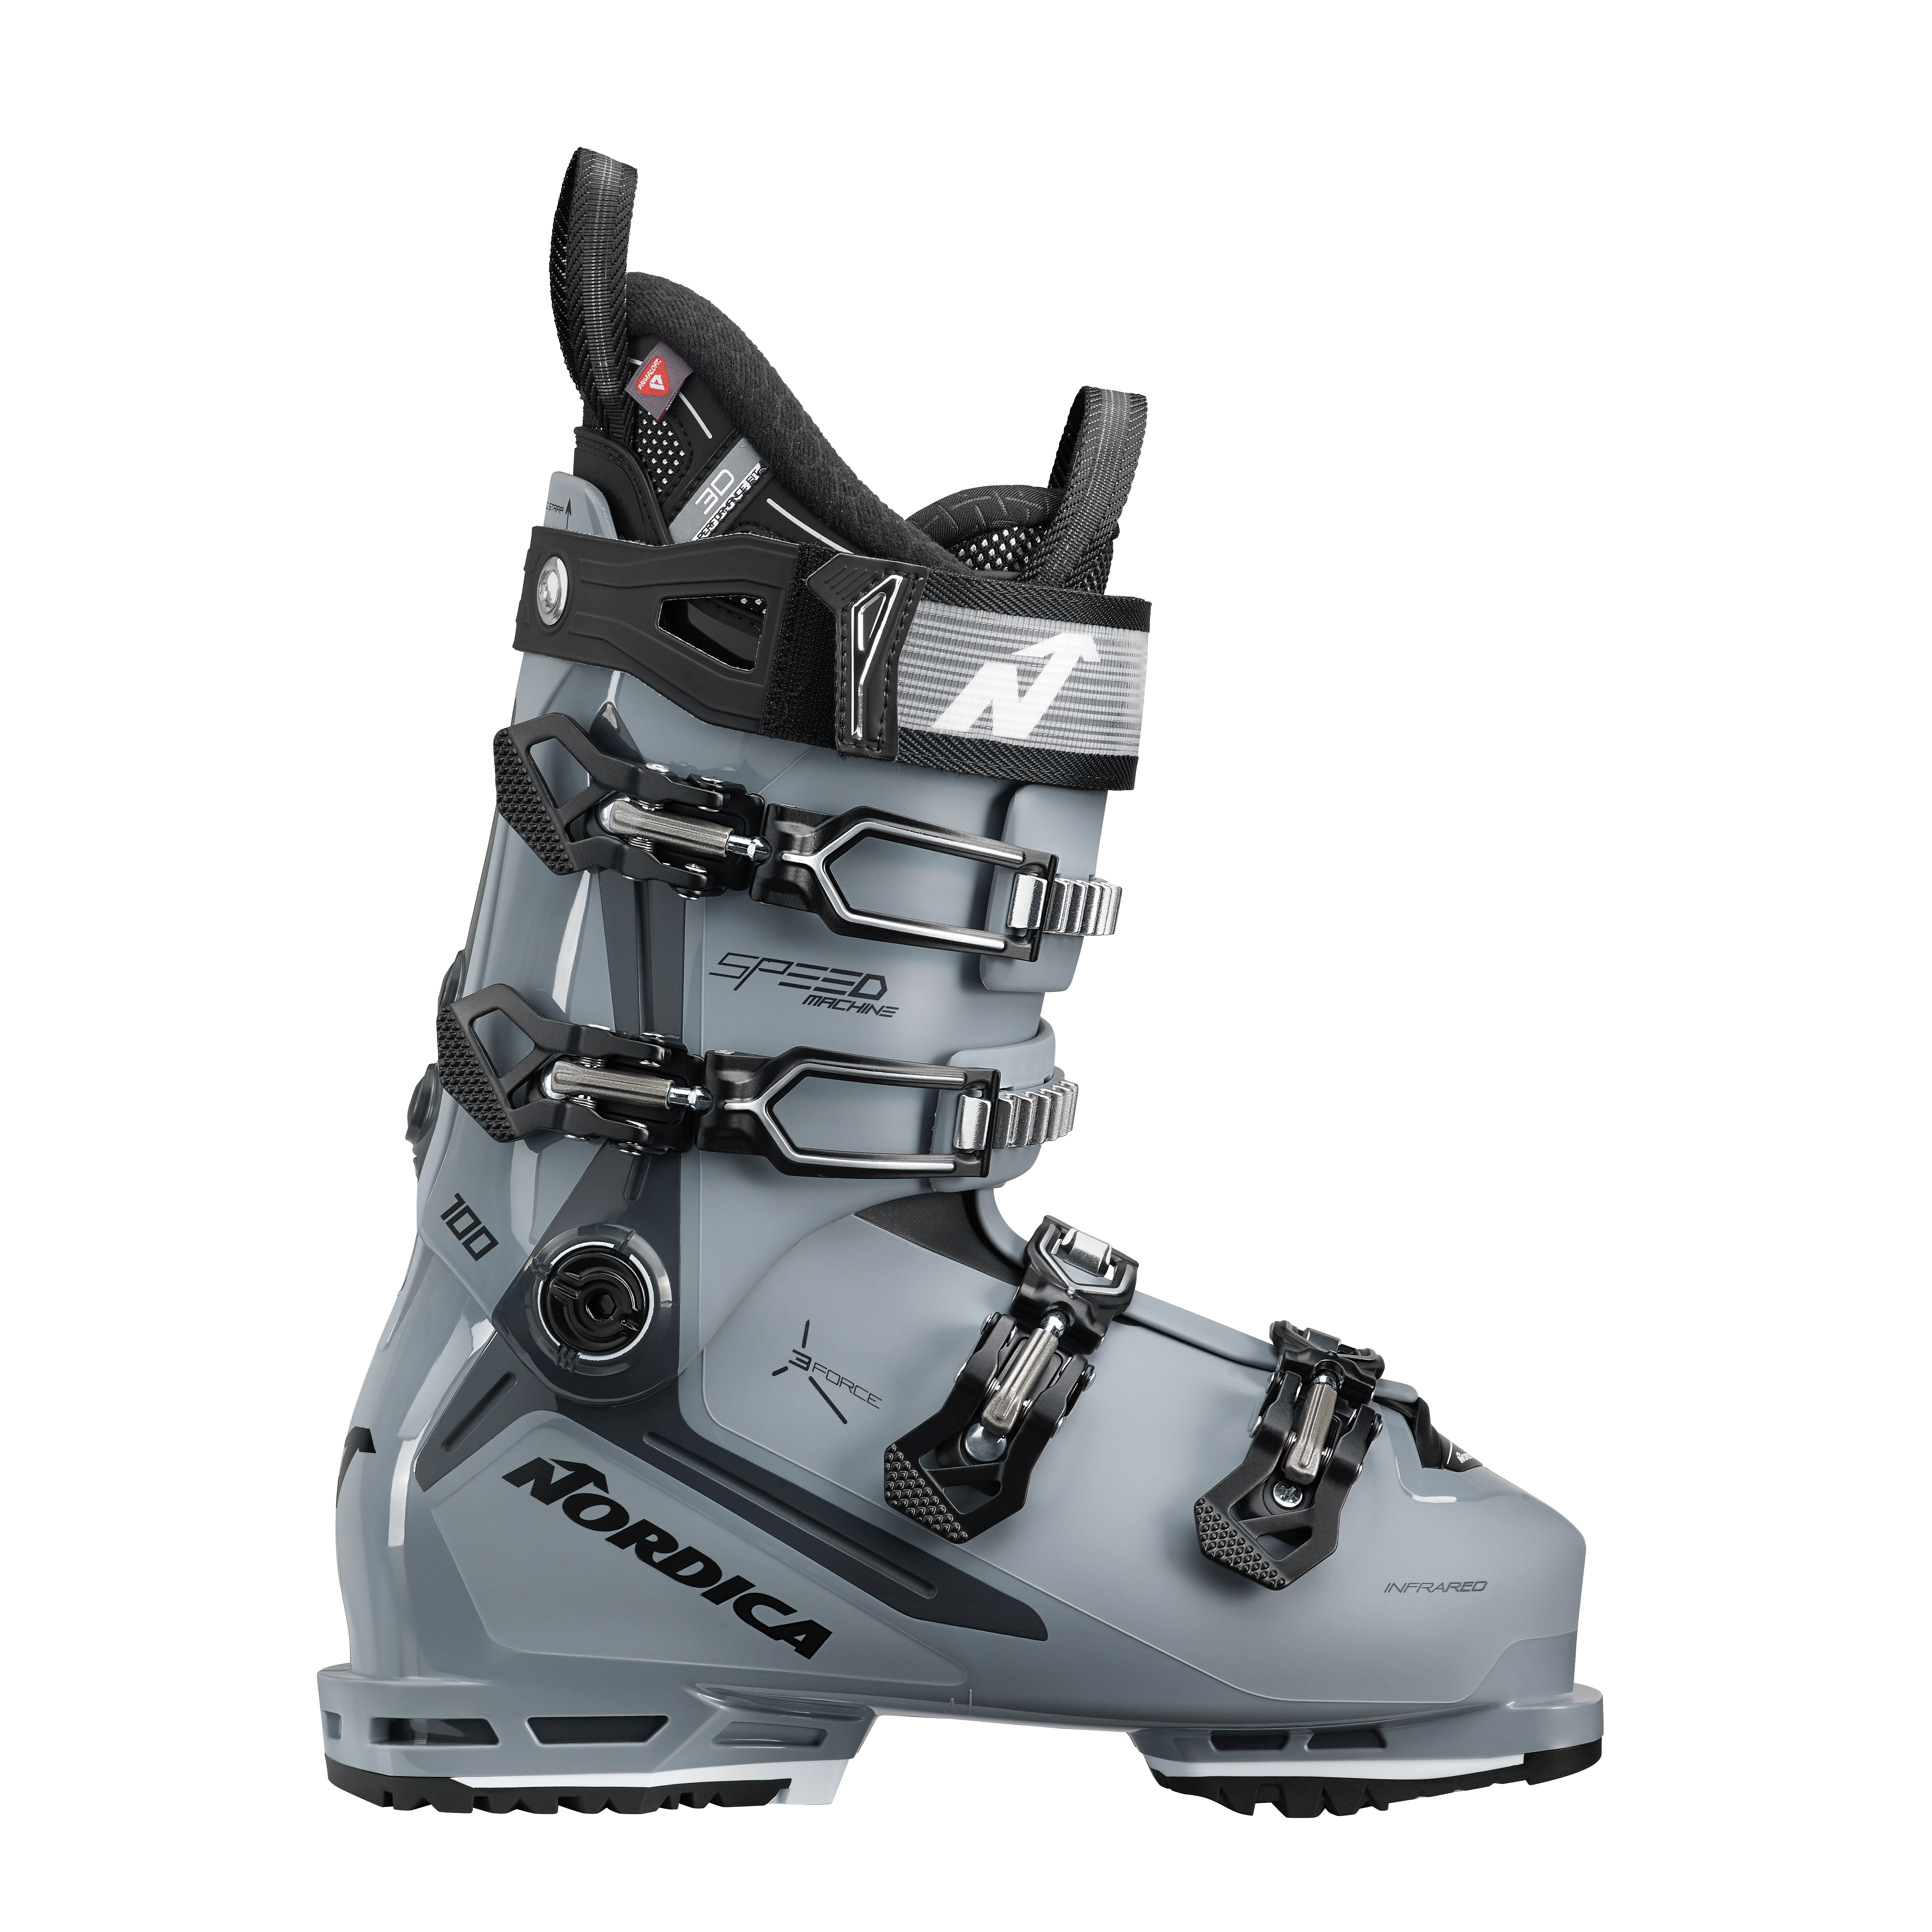 BOOTS Nordica - Skis and Boots – Official website